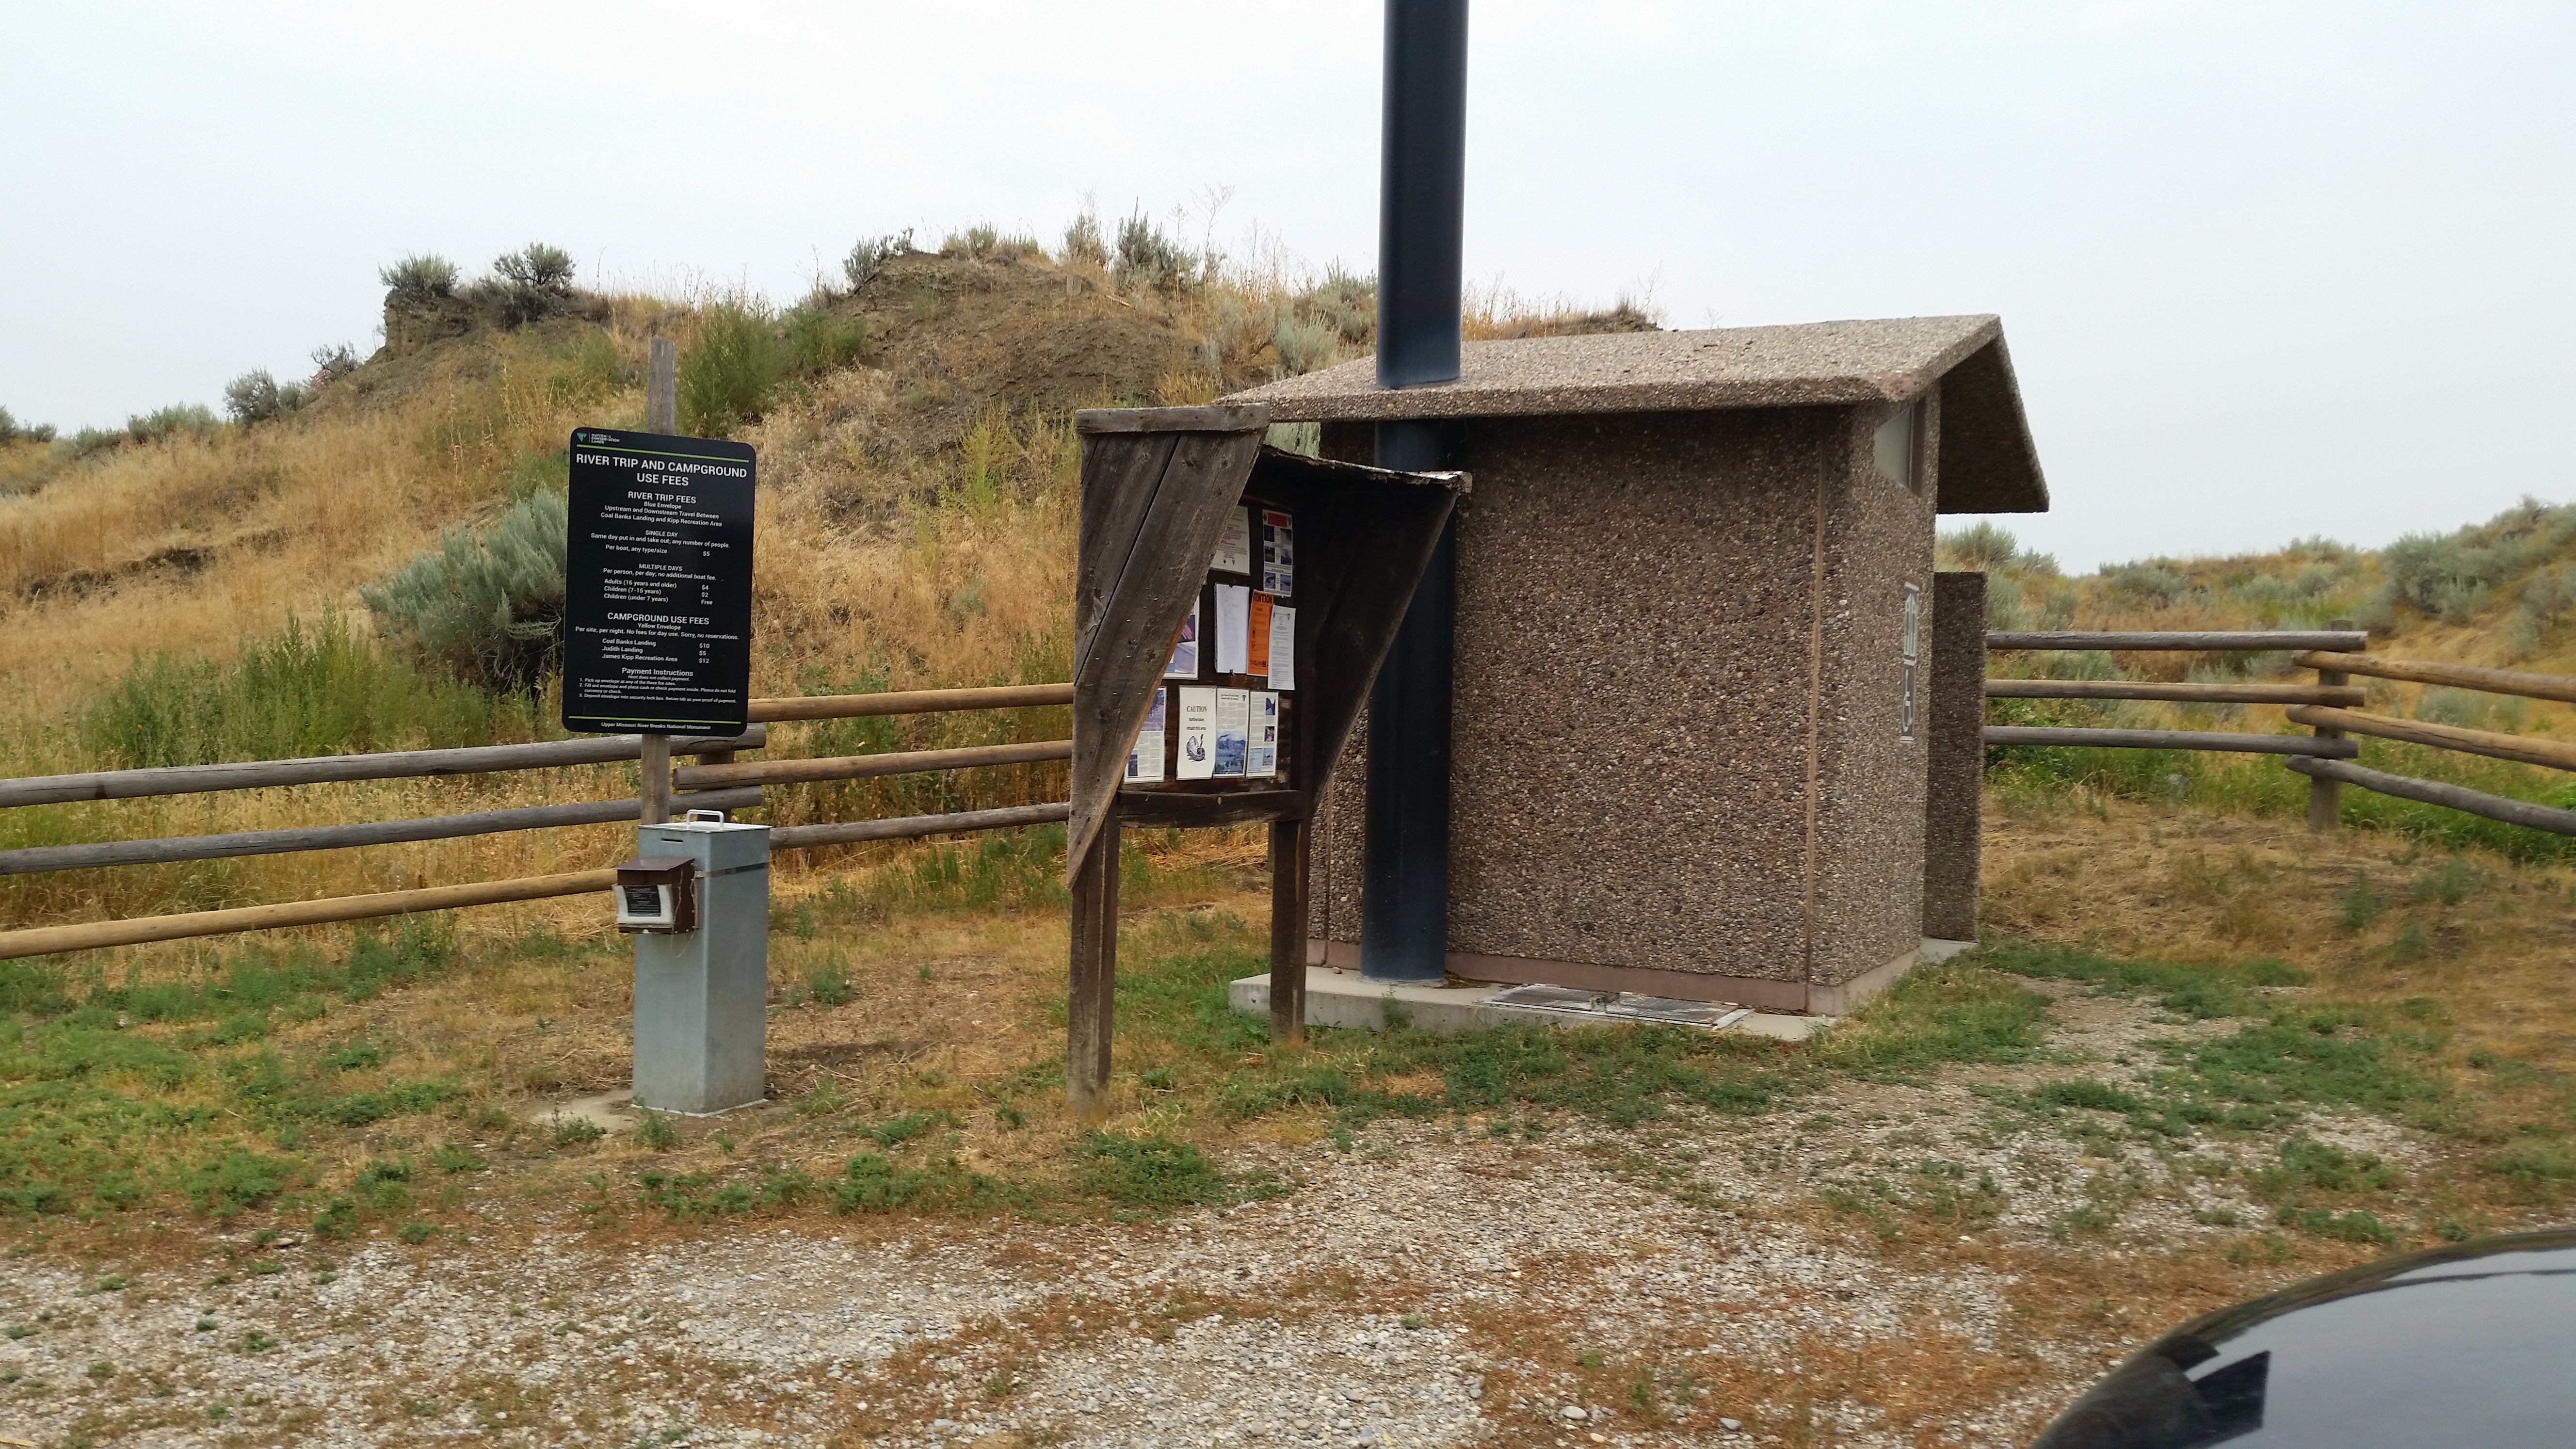 Fee station and vault toilet 